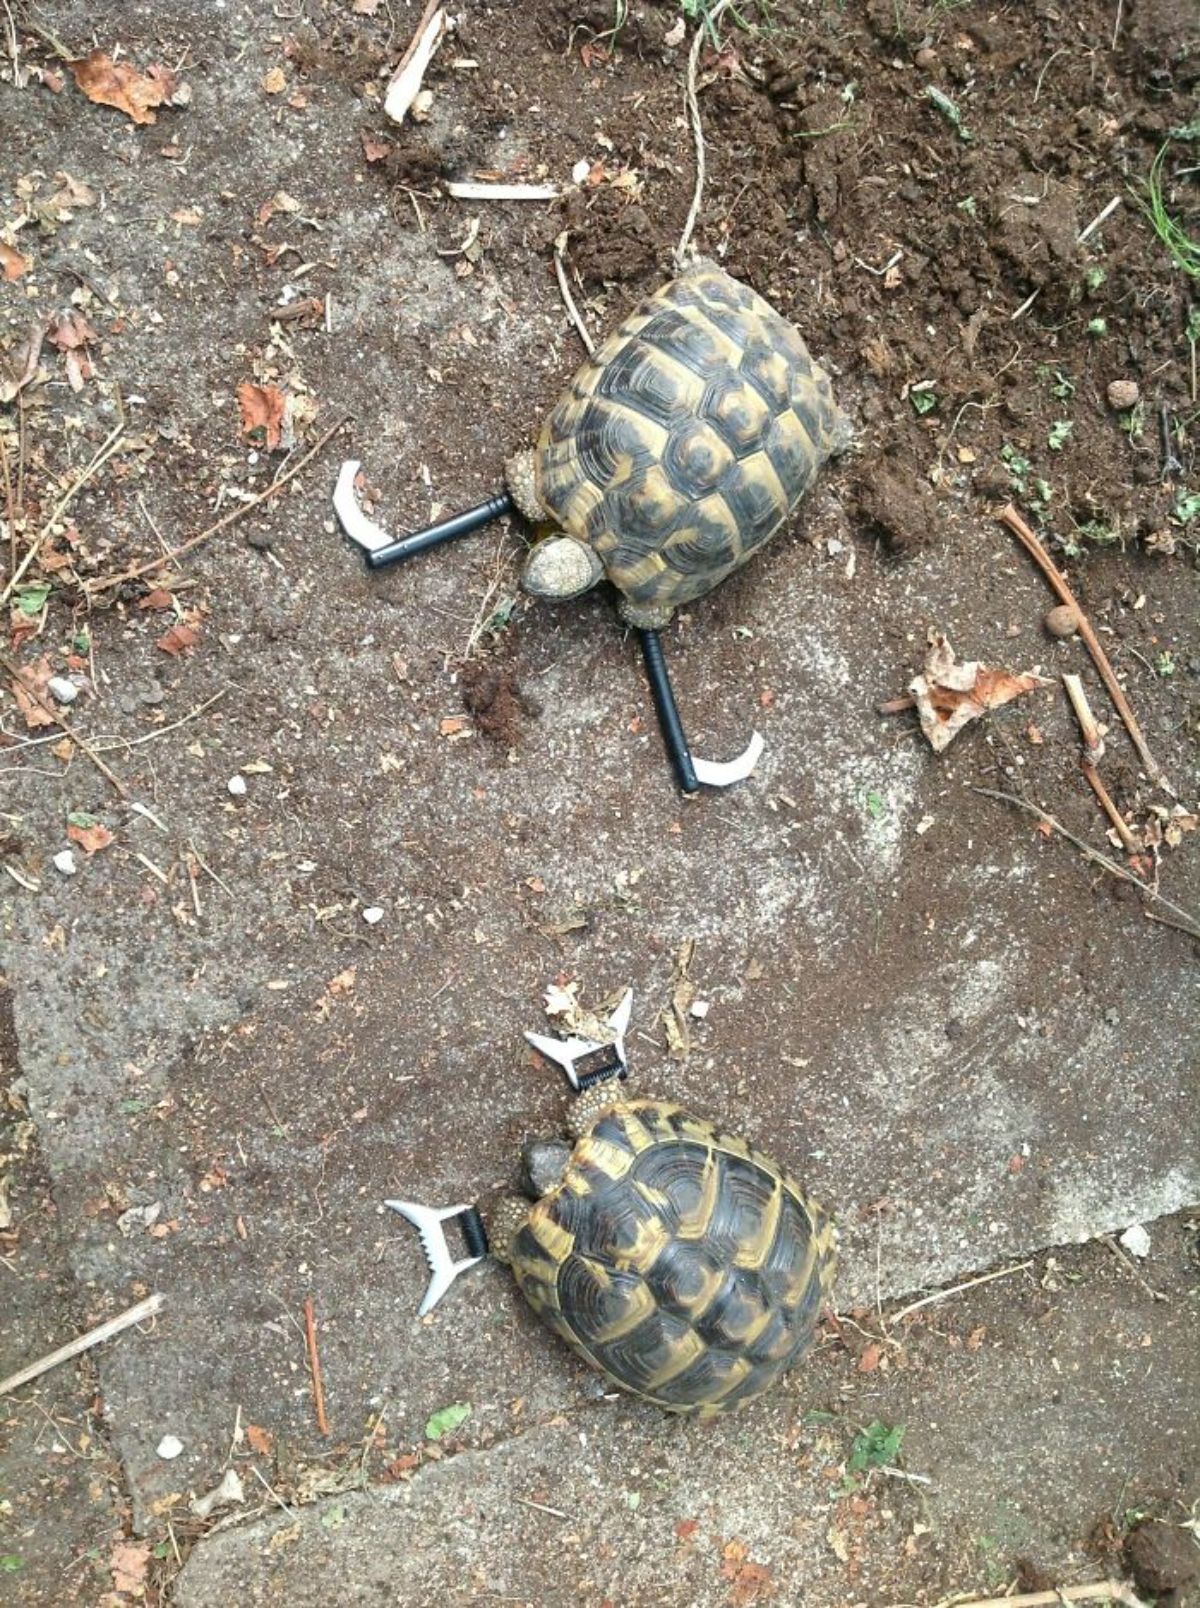 2 turtles on the ground with tiny weapons placed in front of their front legs